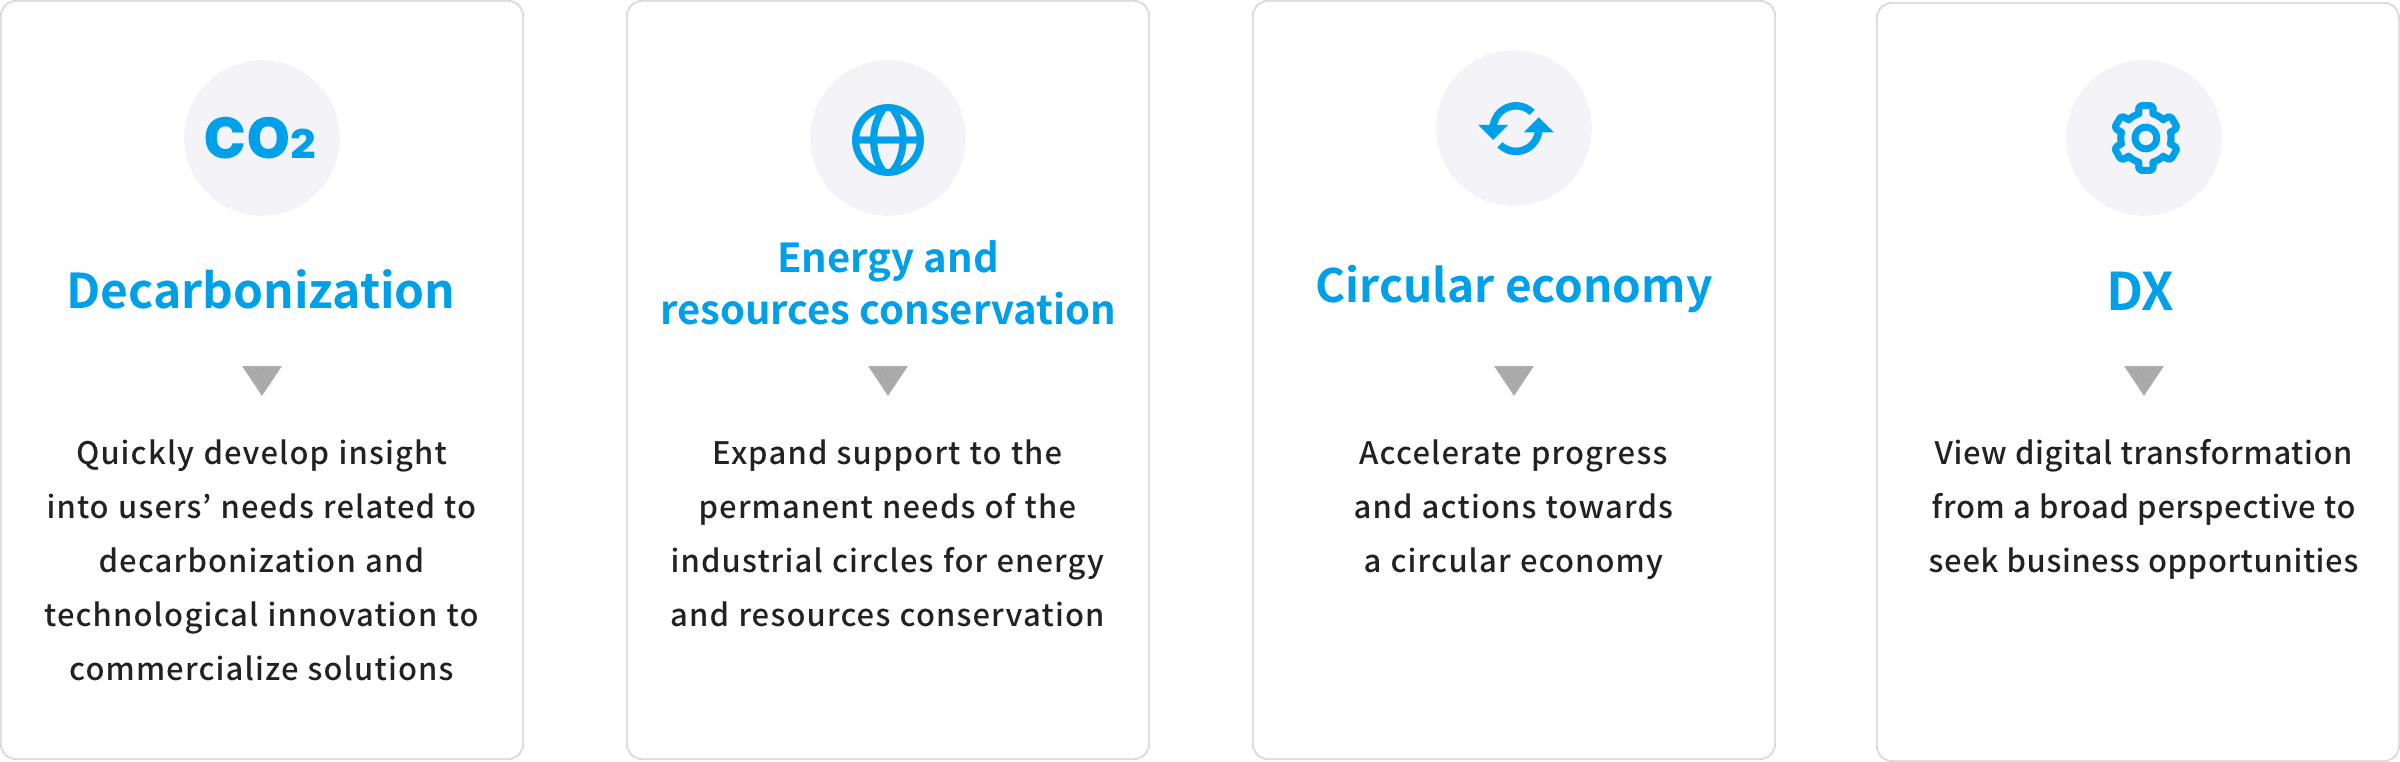 Decarbonization・Energy and resources conservation・Circular economy・DX